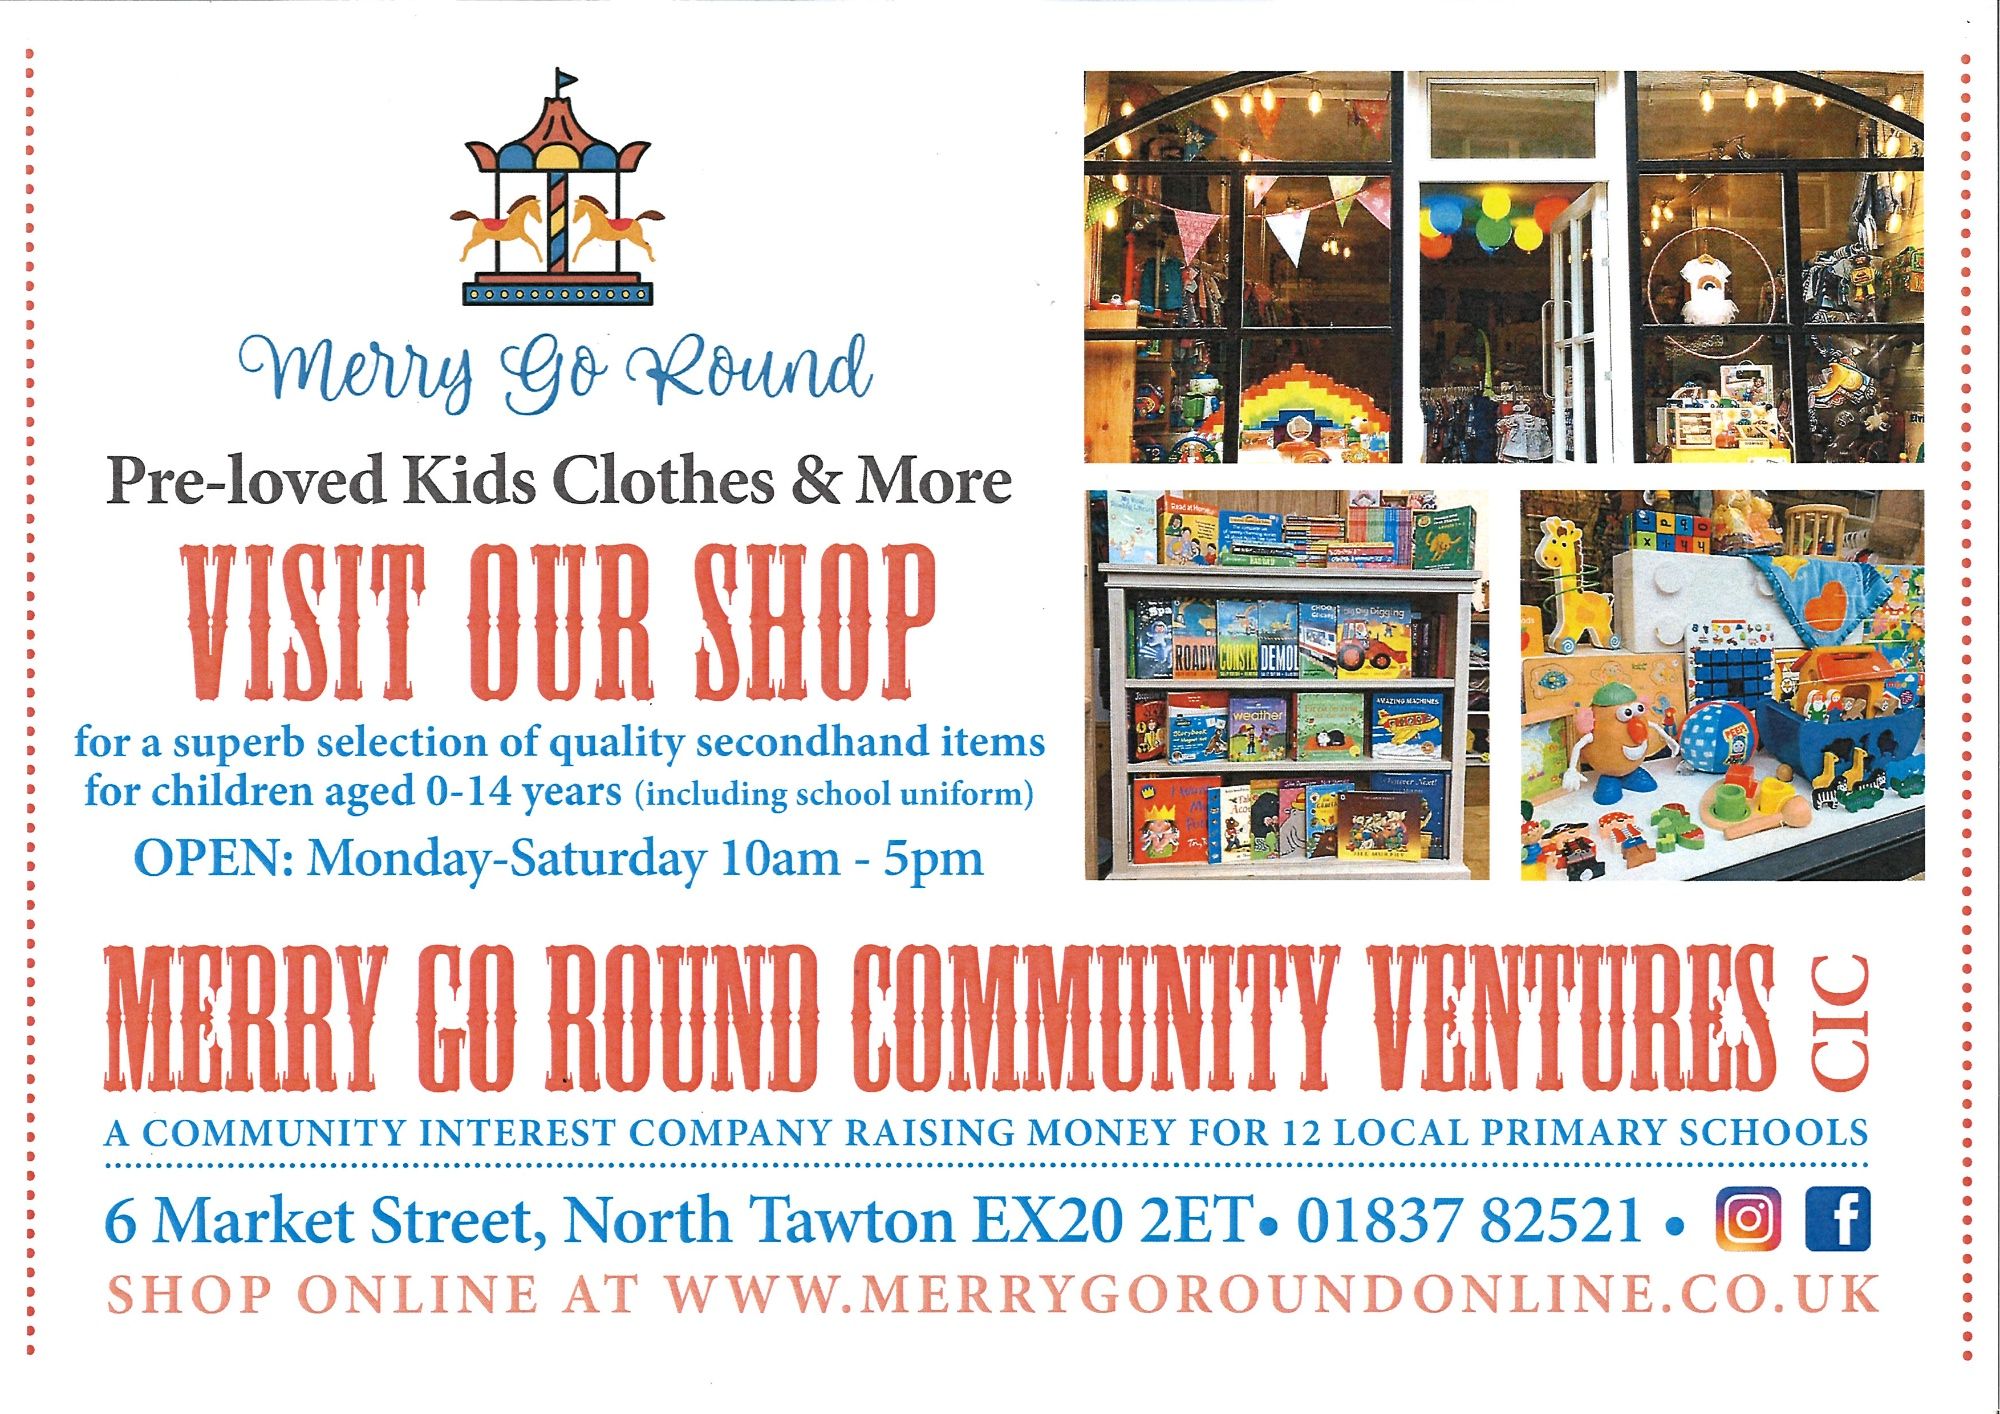 Merry Go Round Pre-loved kids clothes and more. A community interest company raising money for 12 local primary schools. 6 Market St, North Tawton. 01837 82521